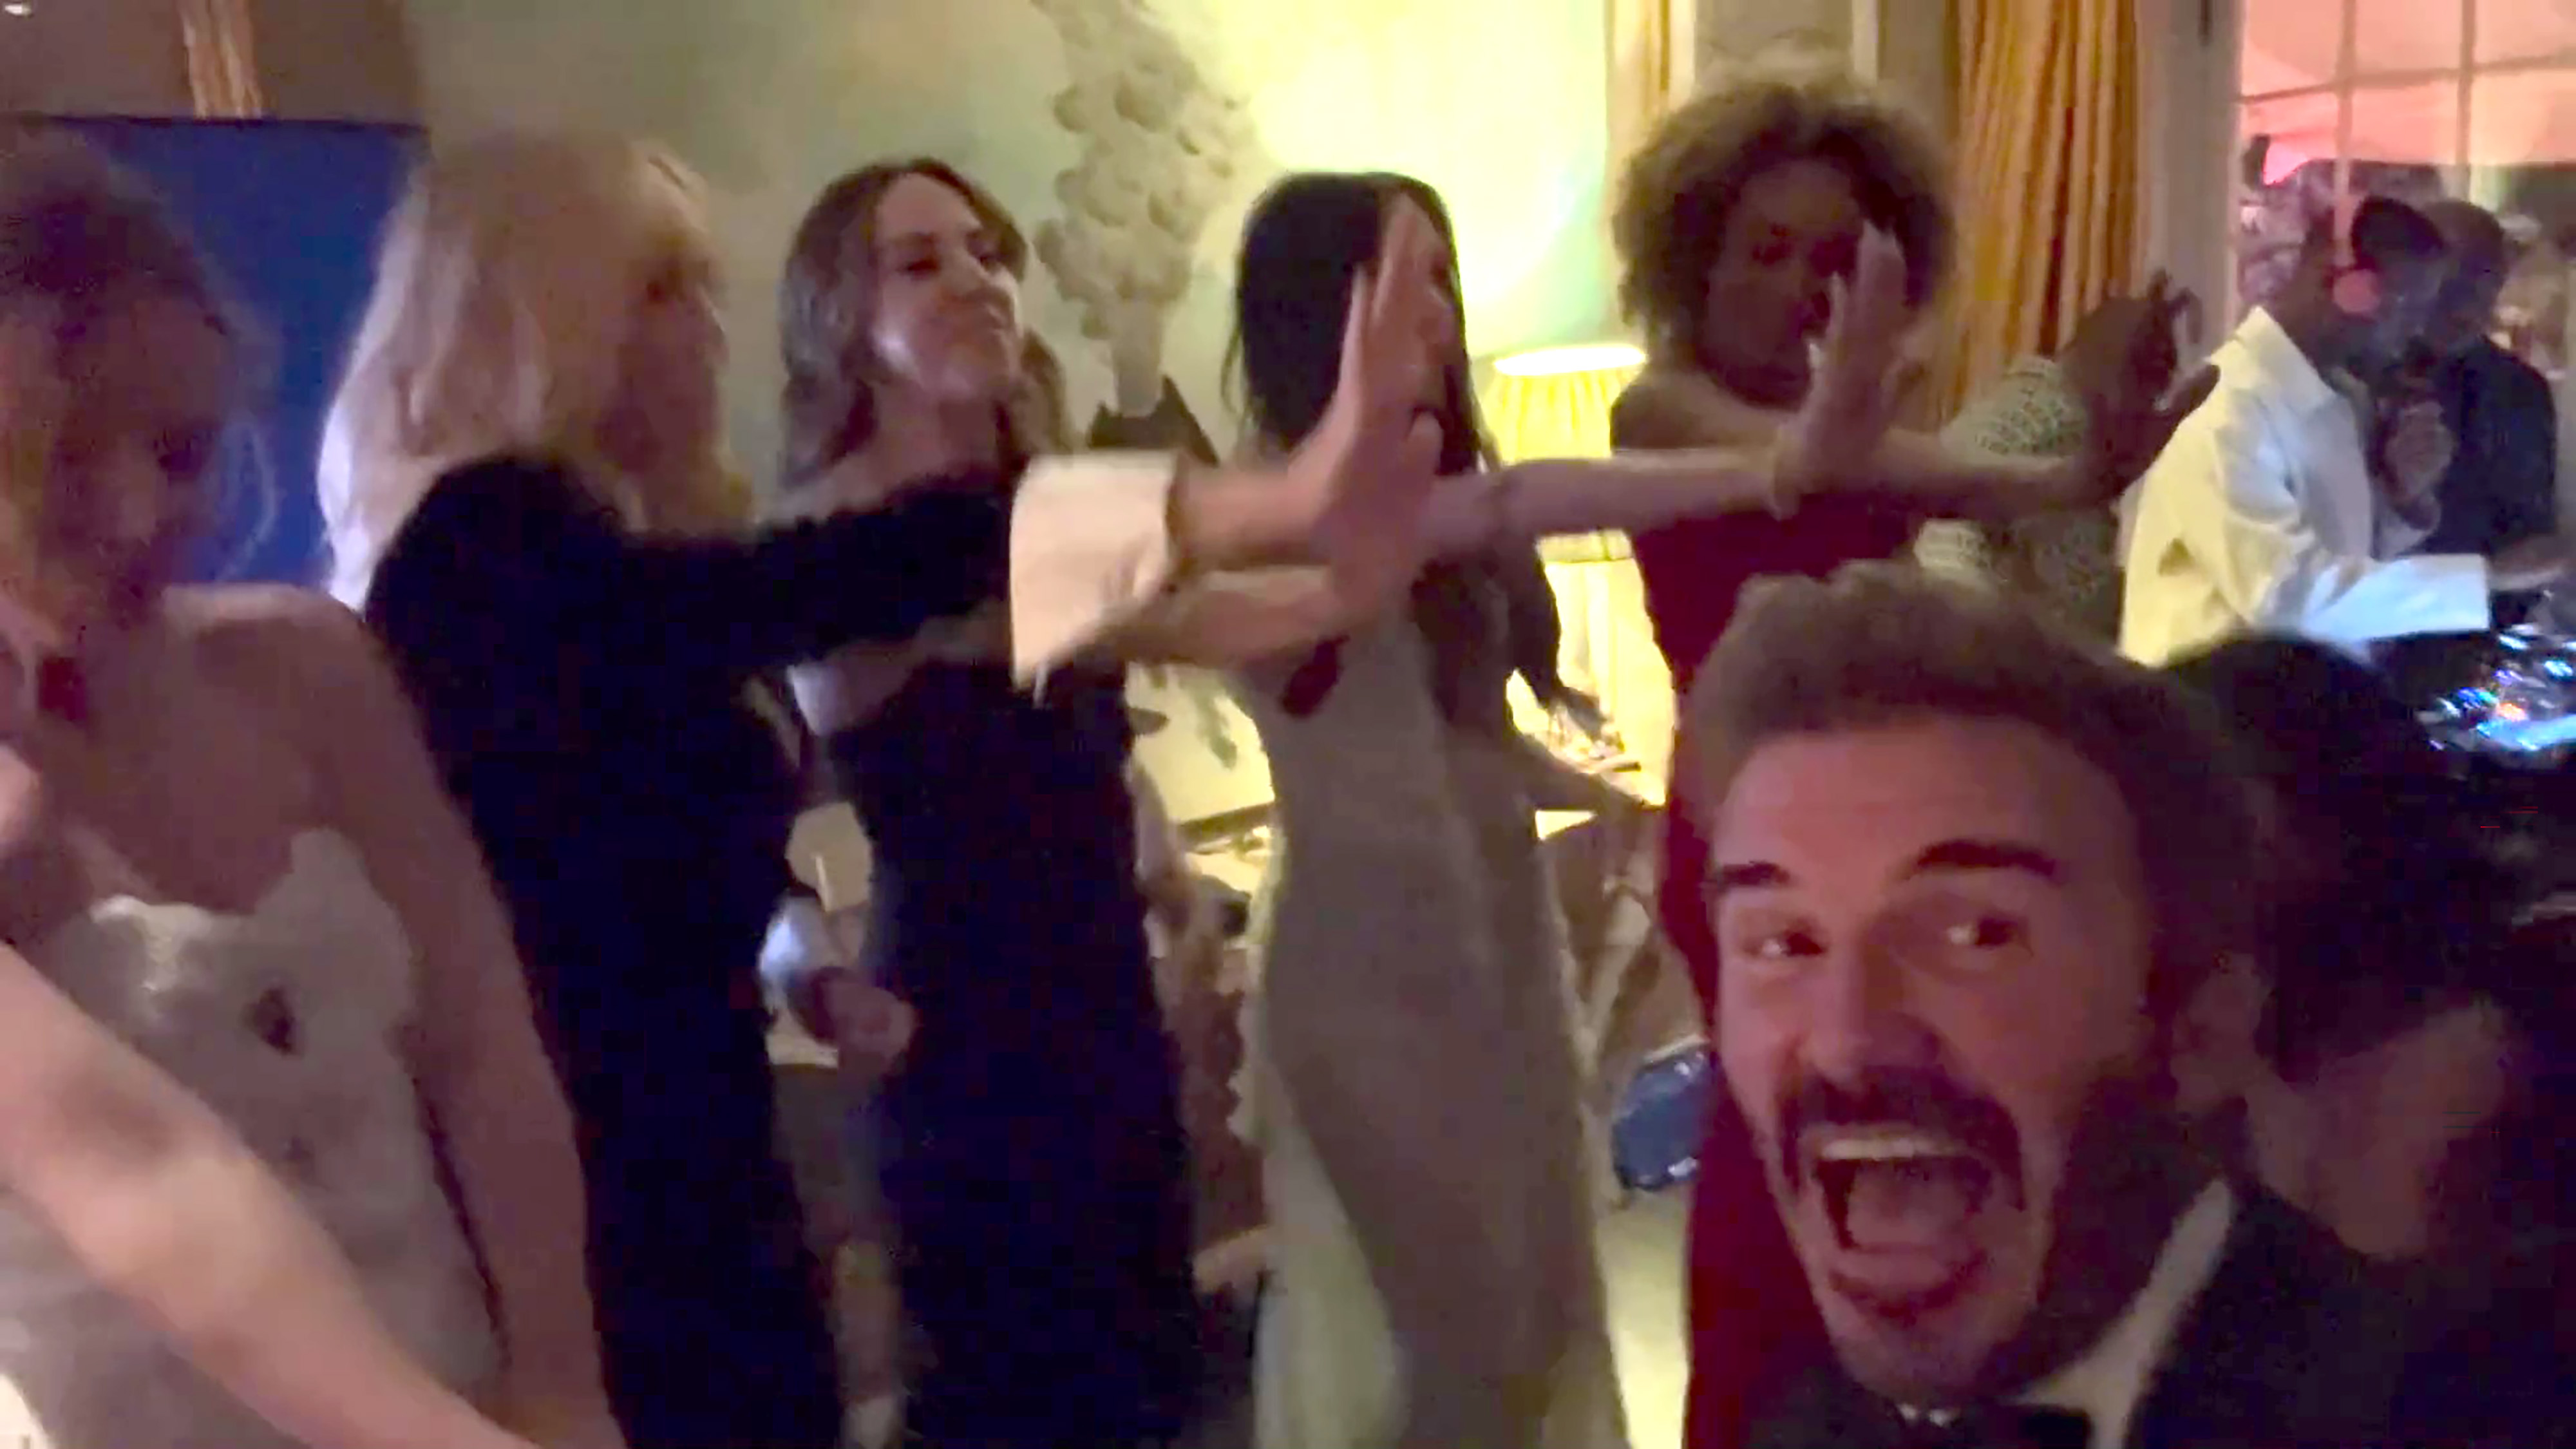 The Spice Girls performed a routine at Victoria's birthday bash